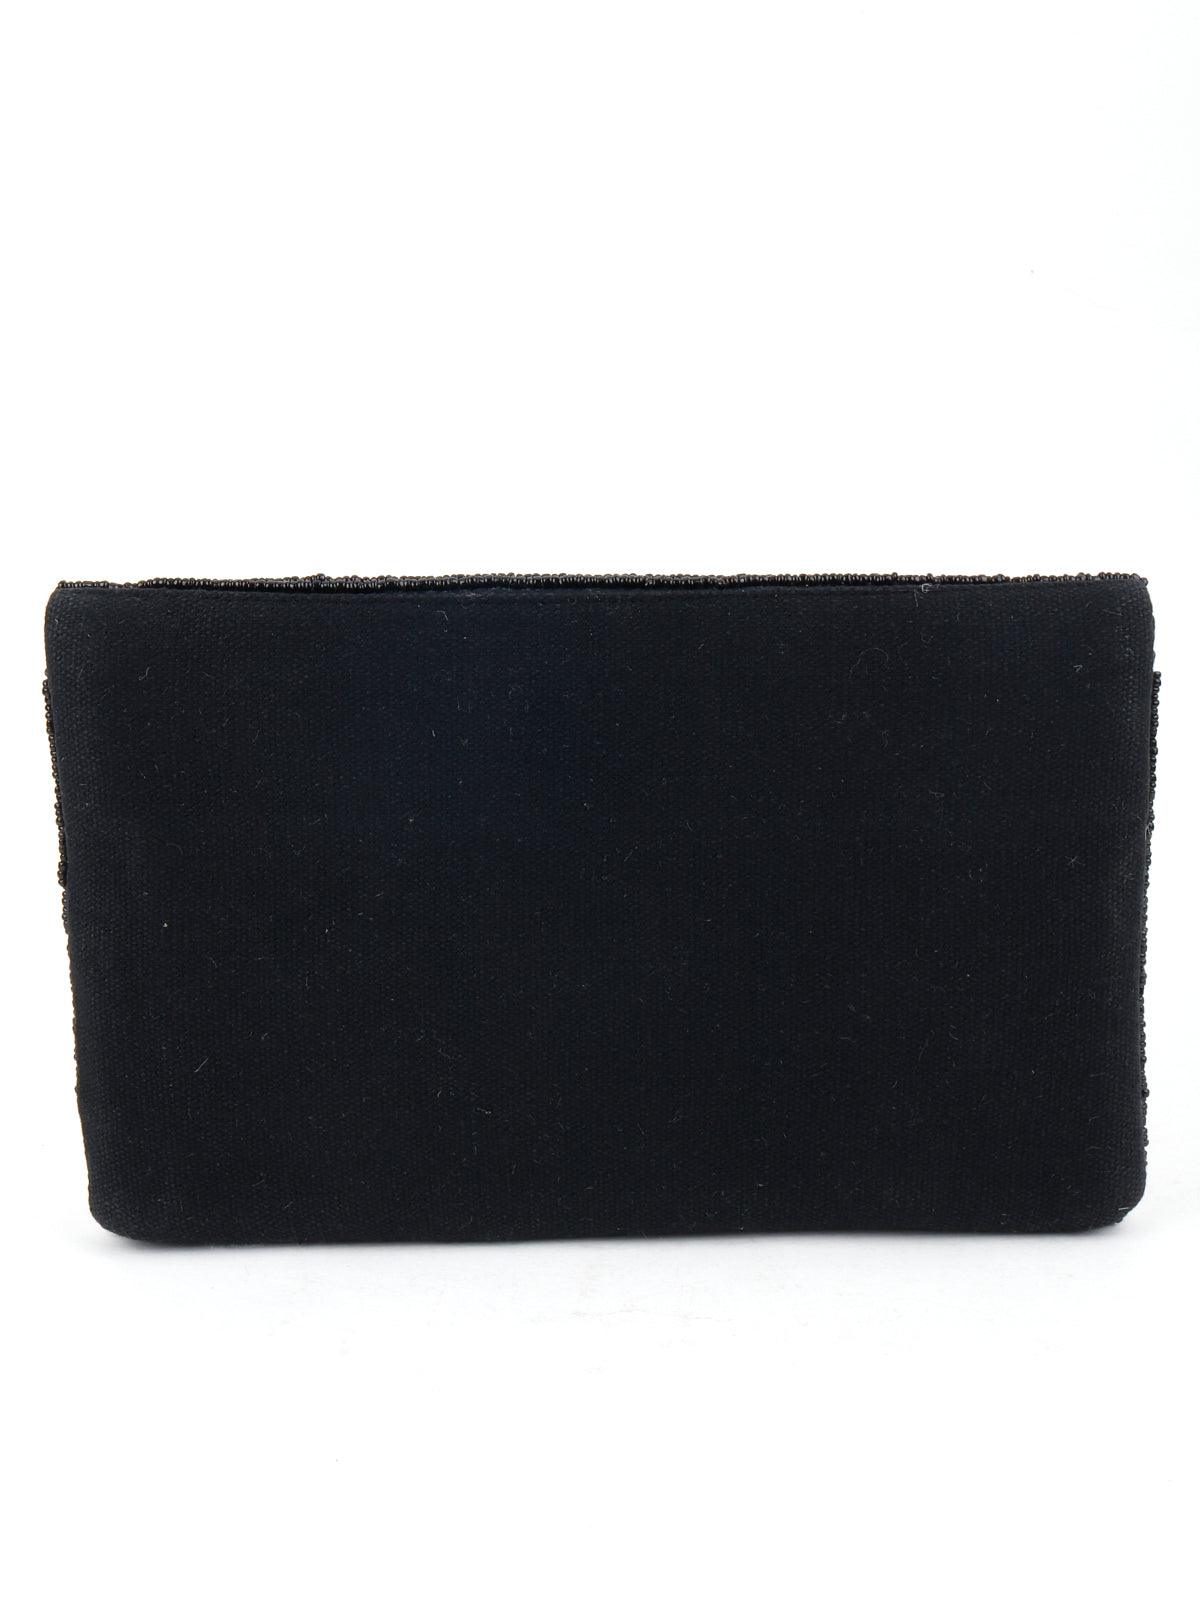 Black And White Beads Envelope Clutch - Odette